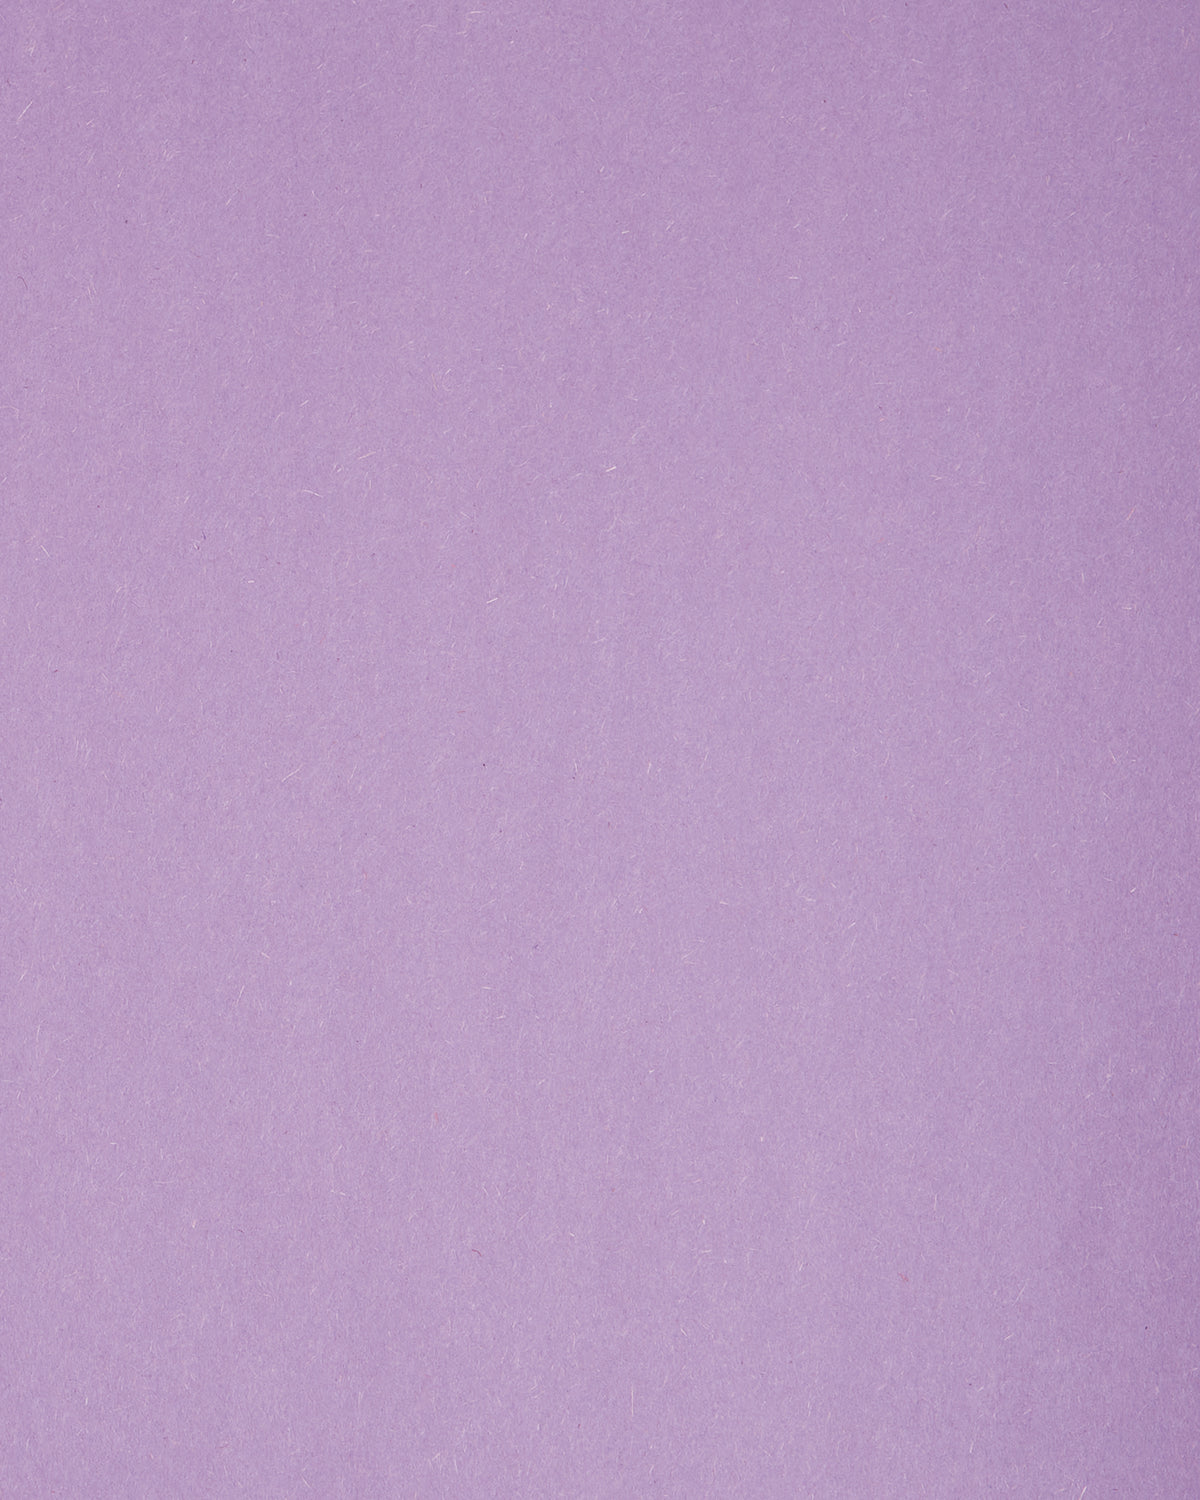 Decorative image of a lilac tile to serve as the background color of the text.